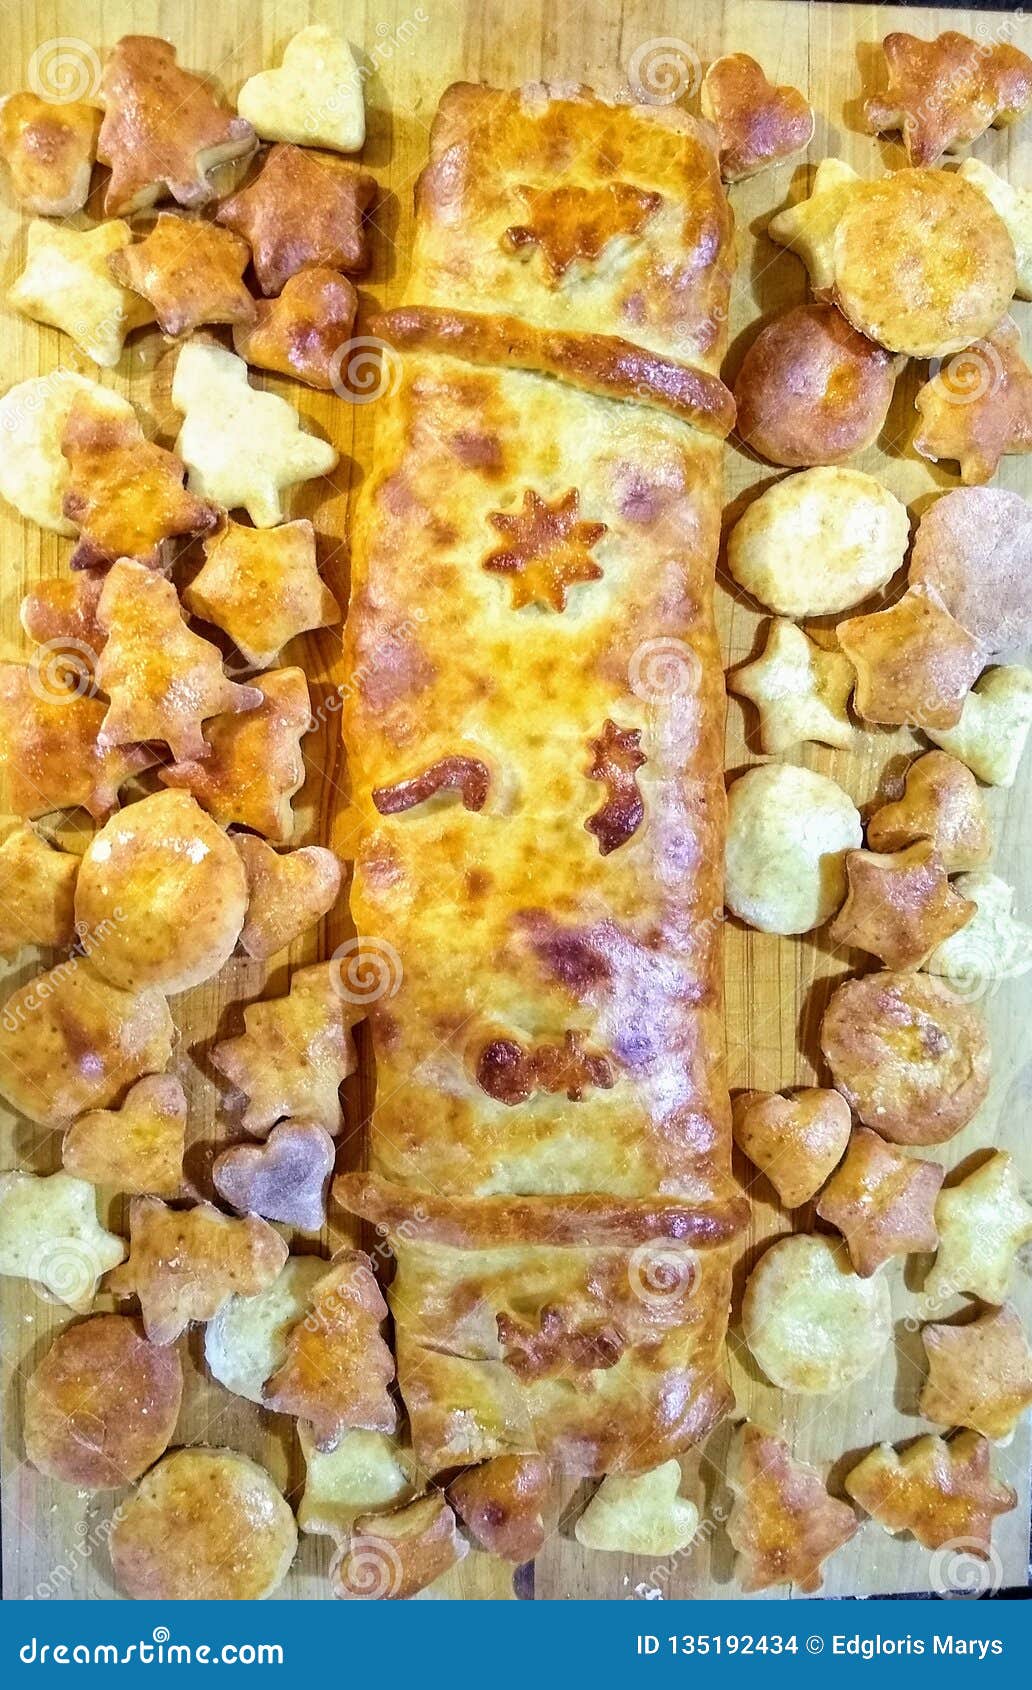 https://thumbs.dreamstime.com/z/venezuelan-ham-bread-pan-de-jamon-traditional-christmas-filled-olives-new-year-its-robust-flavors-unique-135192434.jpg